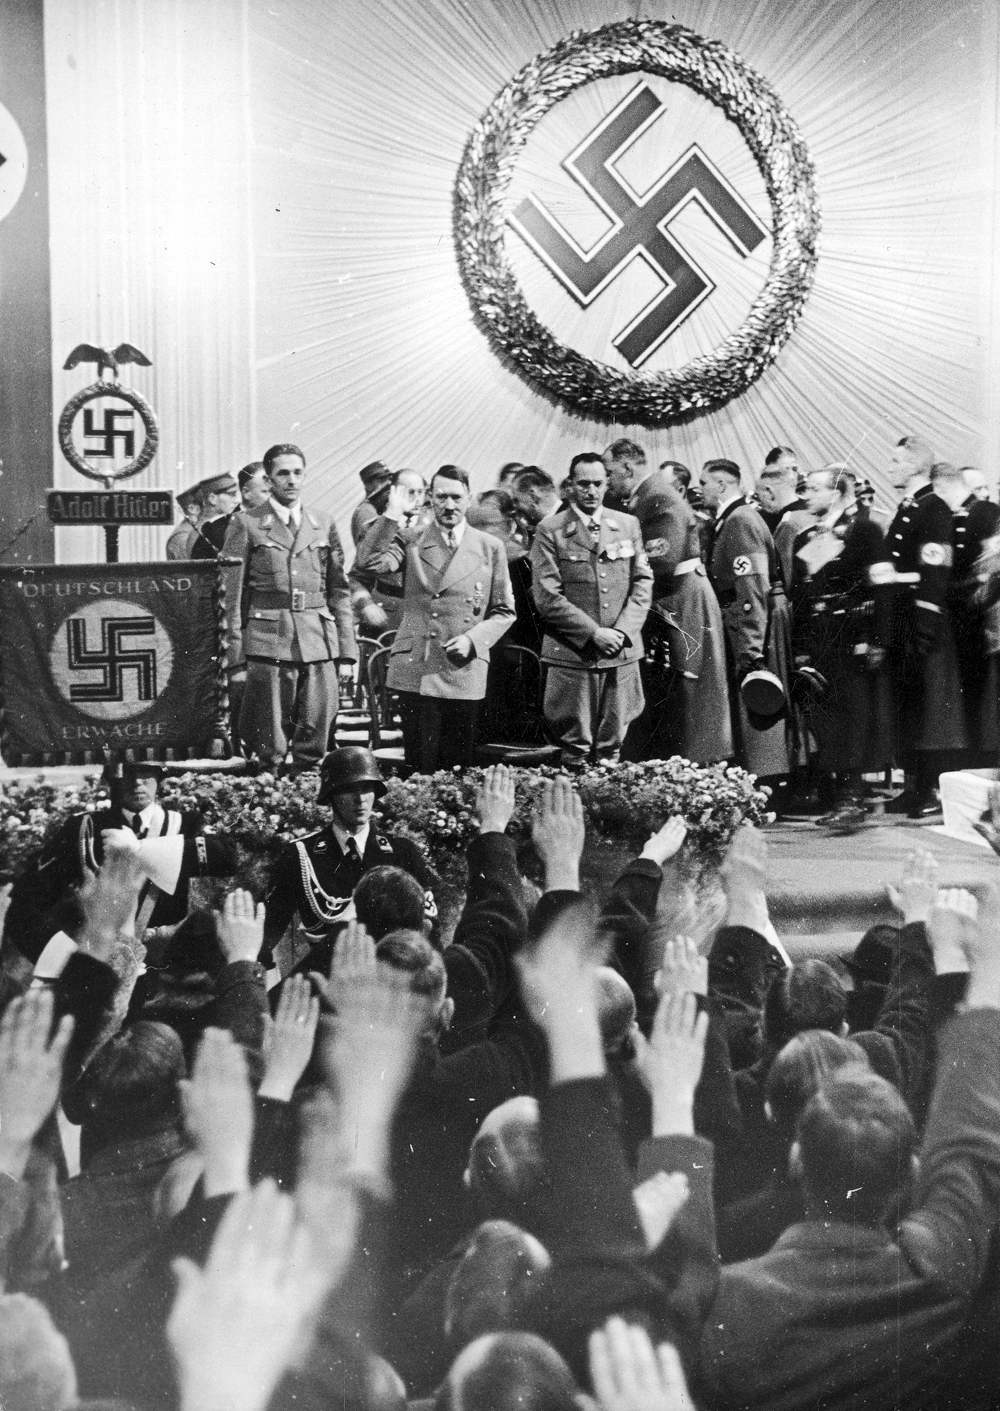 Adolf Hitler with Konrad Henlein and party members during his visit to the Sudetenland town of Reichenberg